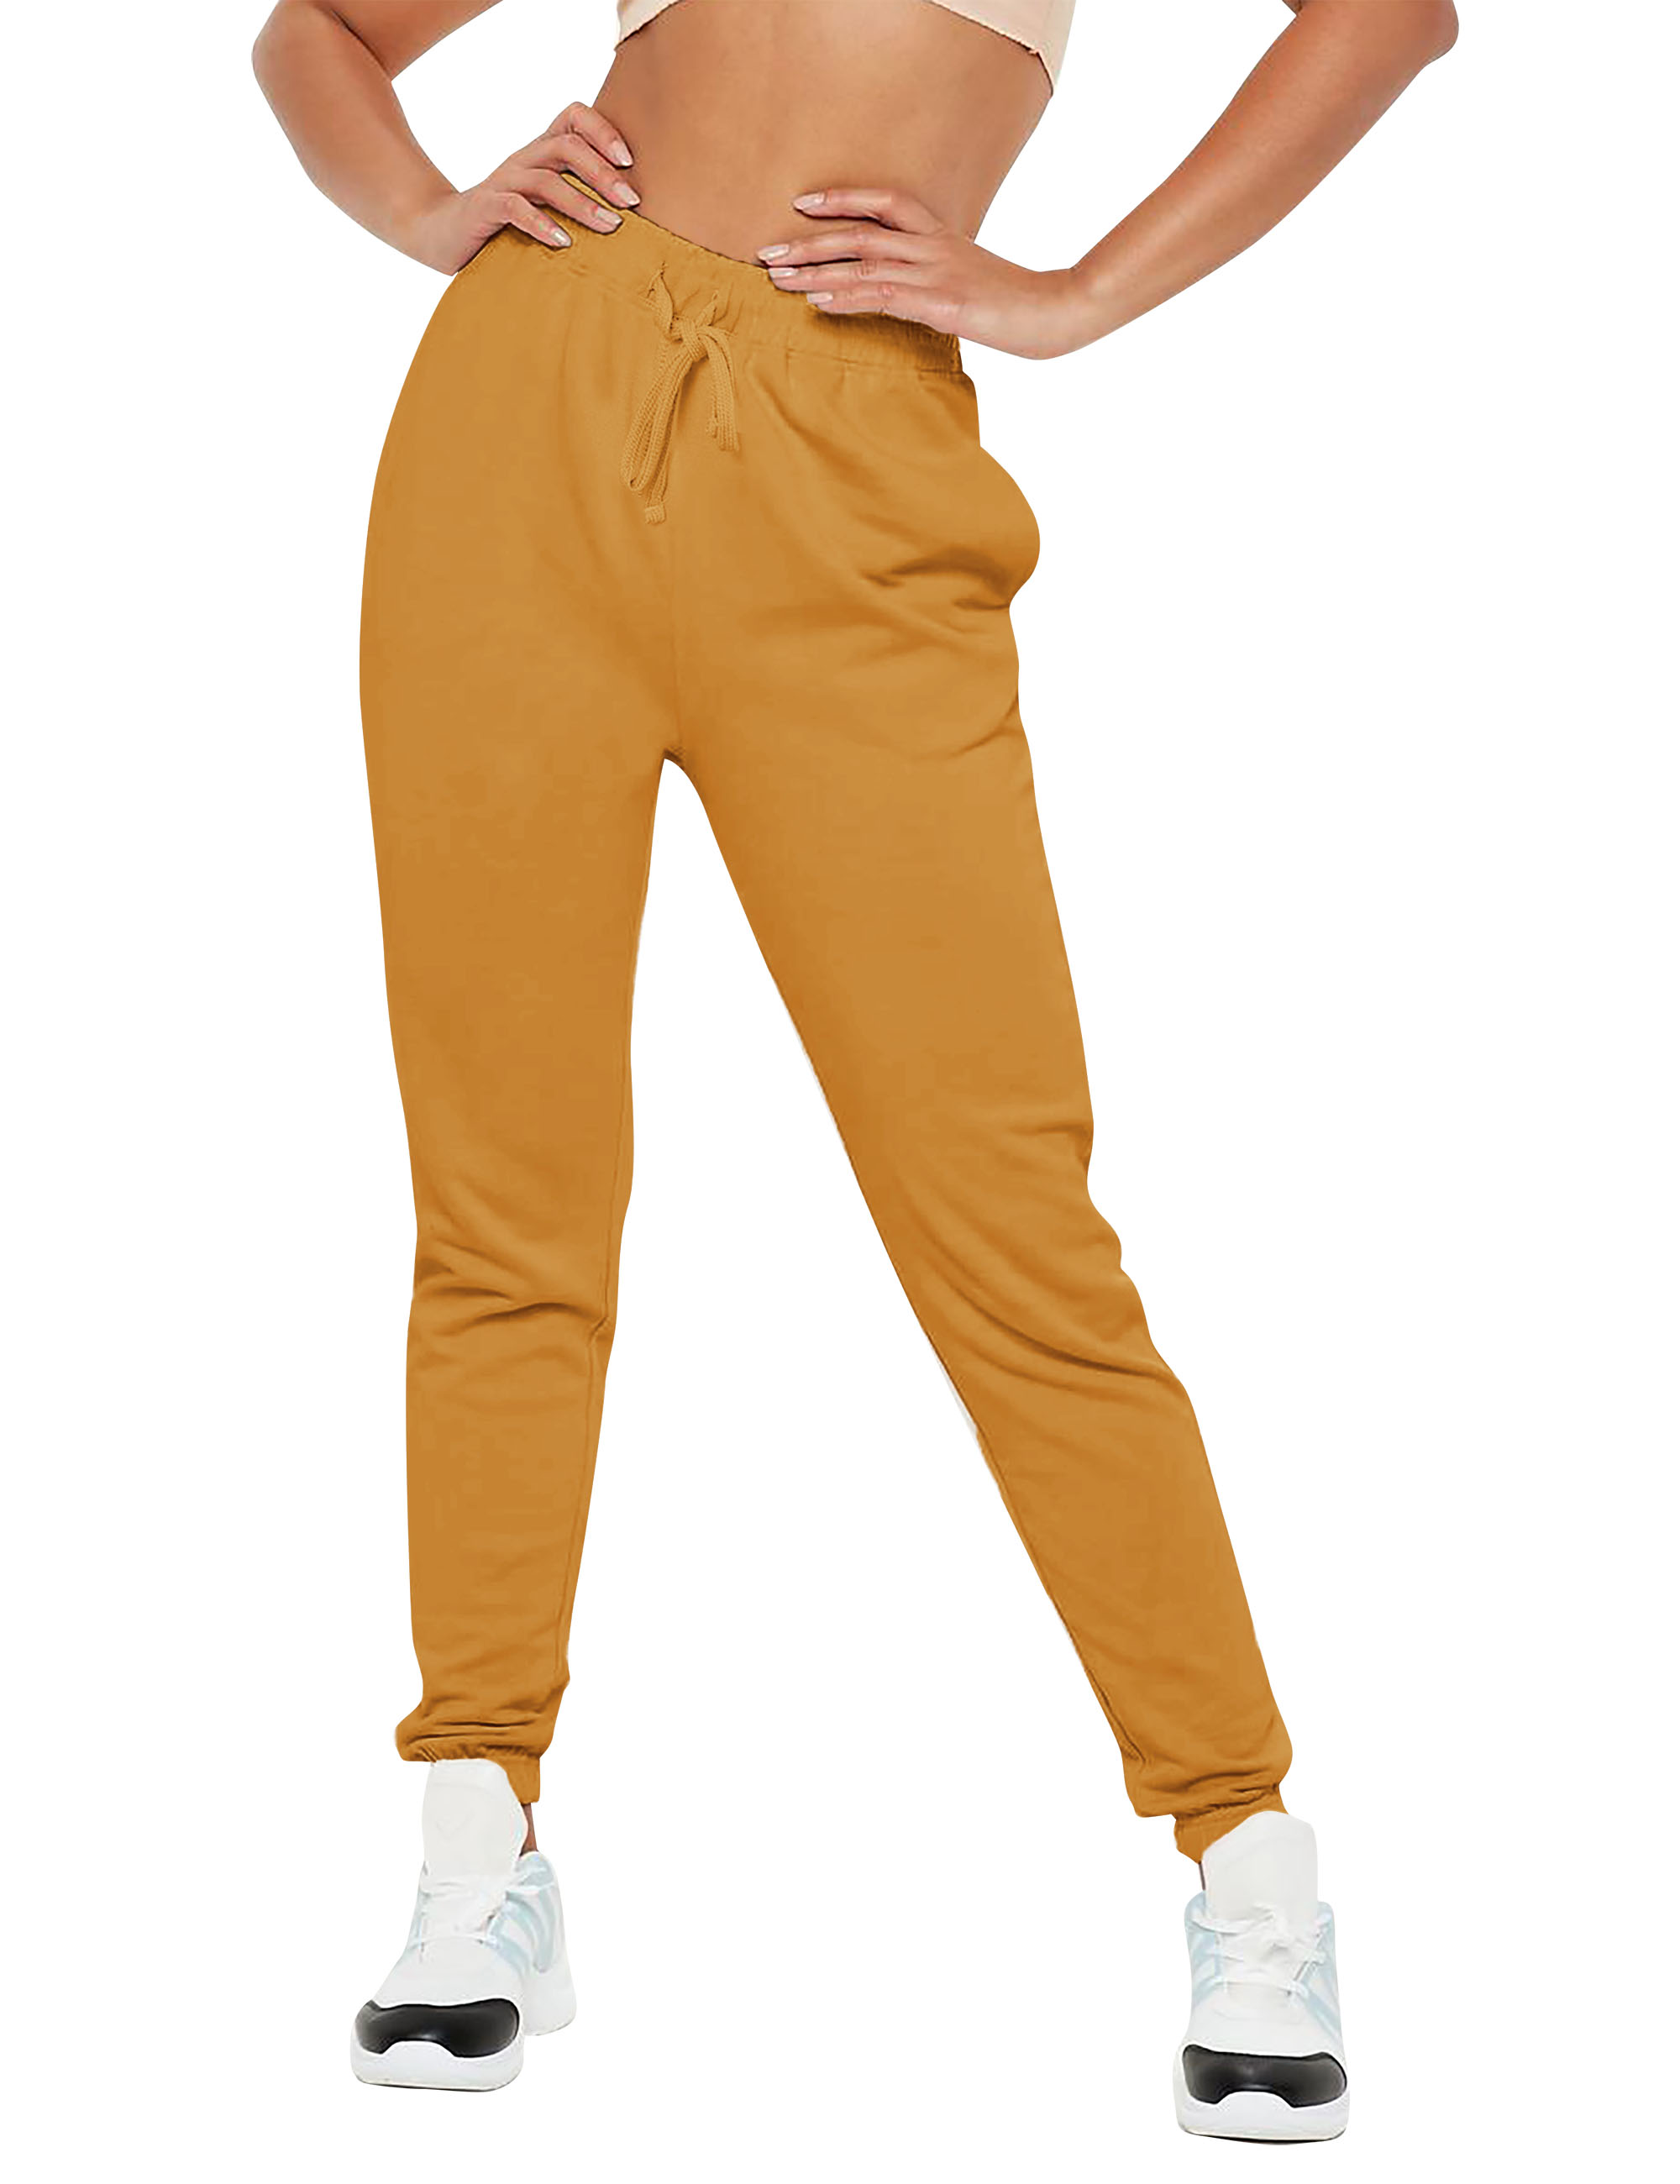 Hat and Beyond Womens French Terry Jogger Pants with Drawstring Lightweight Sweatpants Active Street Sportswear